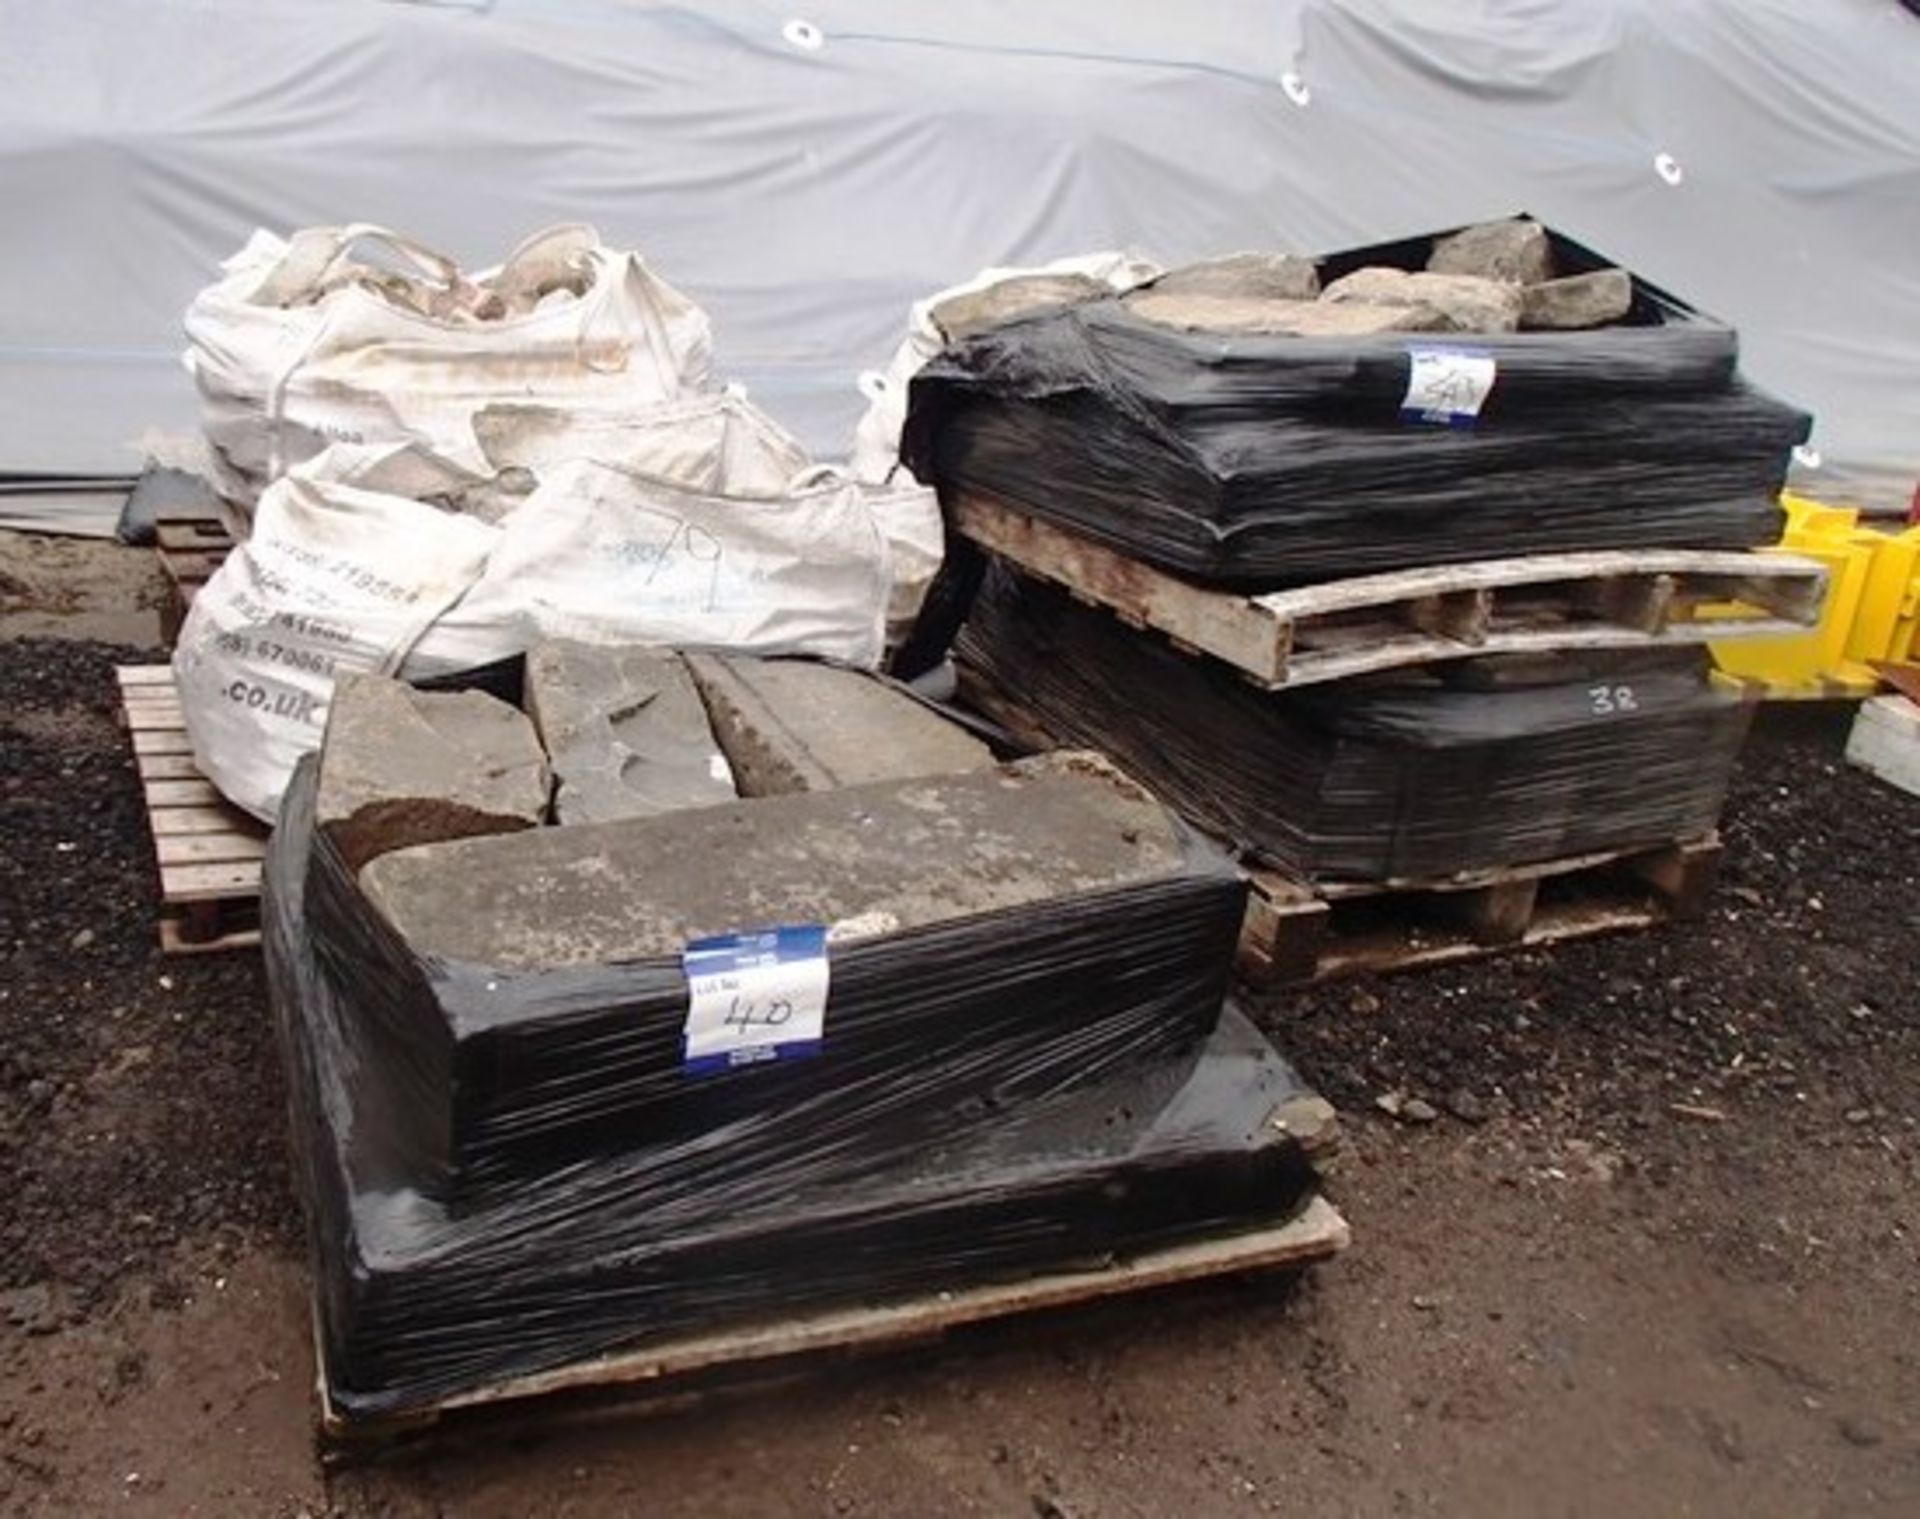 1 BAG OF MIXED BLOCKS CONCRETE 6" X 6" APPROX, 1 PALLET OF SLABS APPROX 12" X 36", 1 BAG BLOCKS